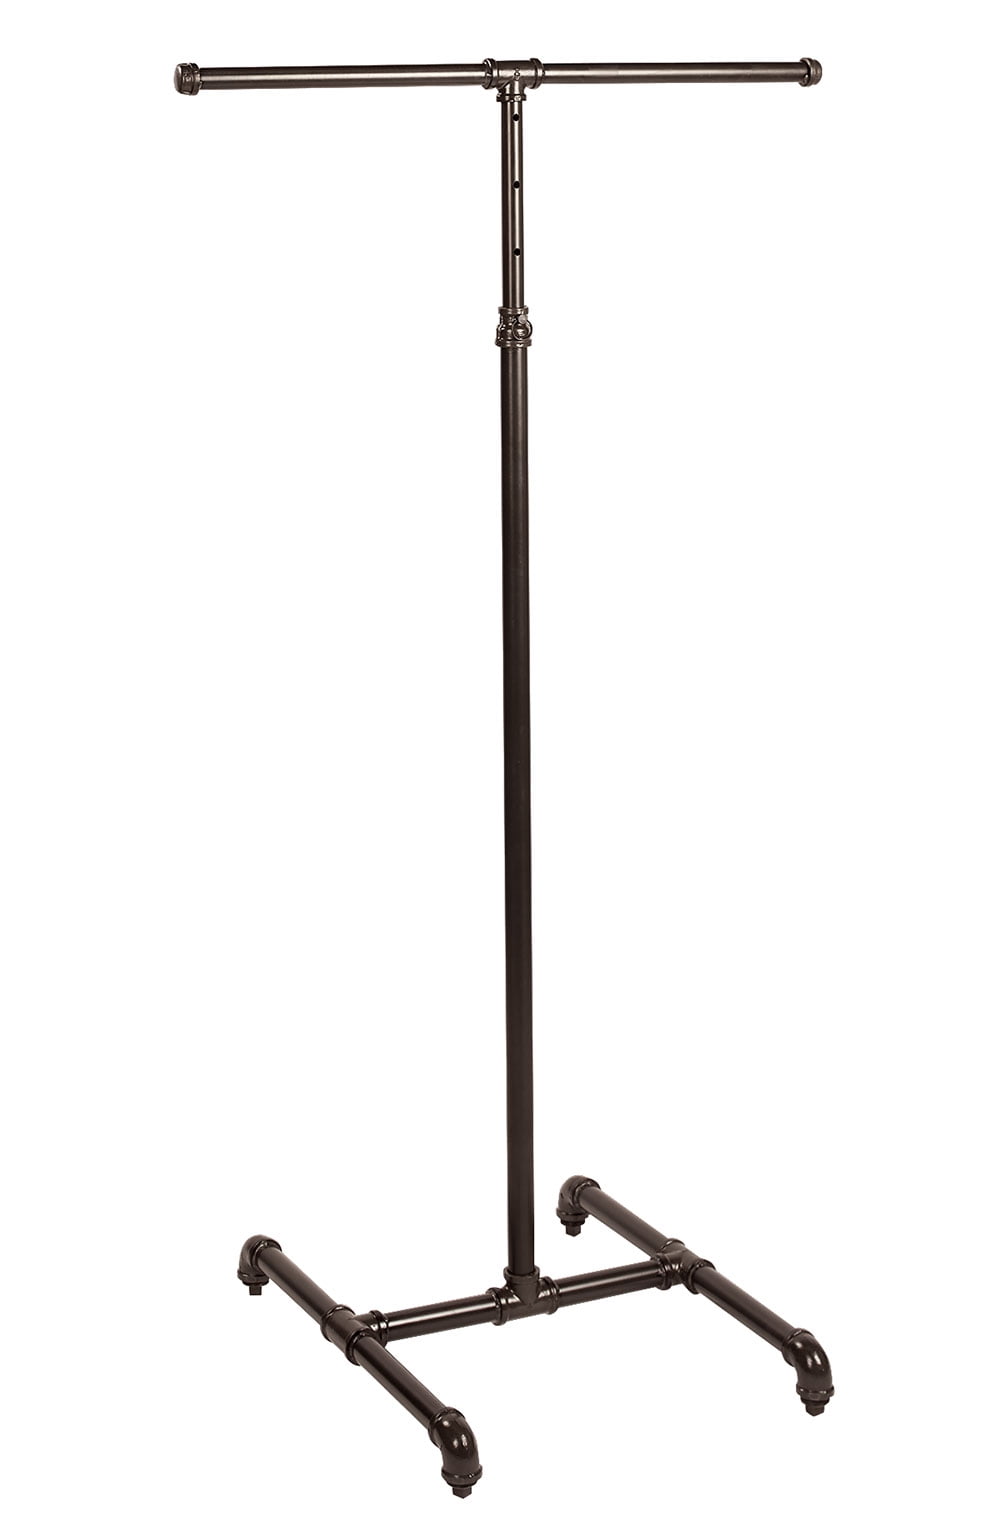 48-72 H x 18½ x 24½W SSWBasics Boutique Pipe 2-Way Clothing Rack with Straight Arms